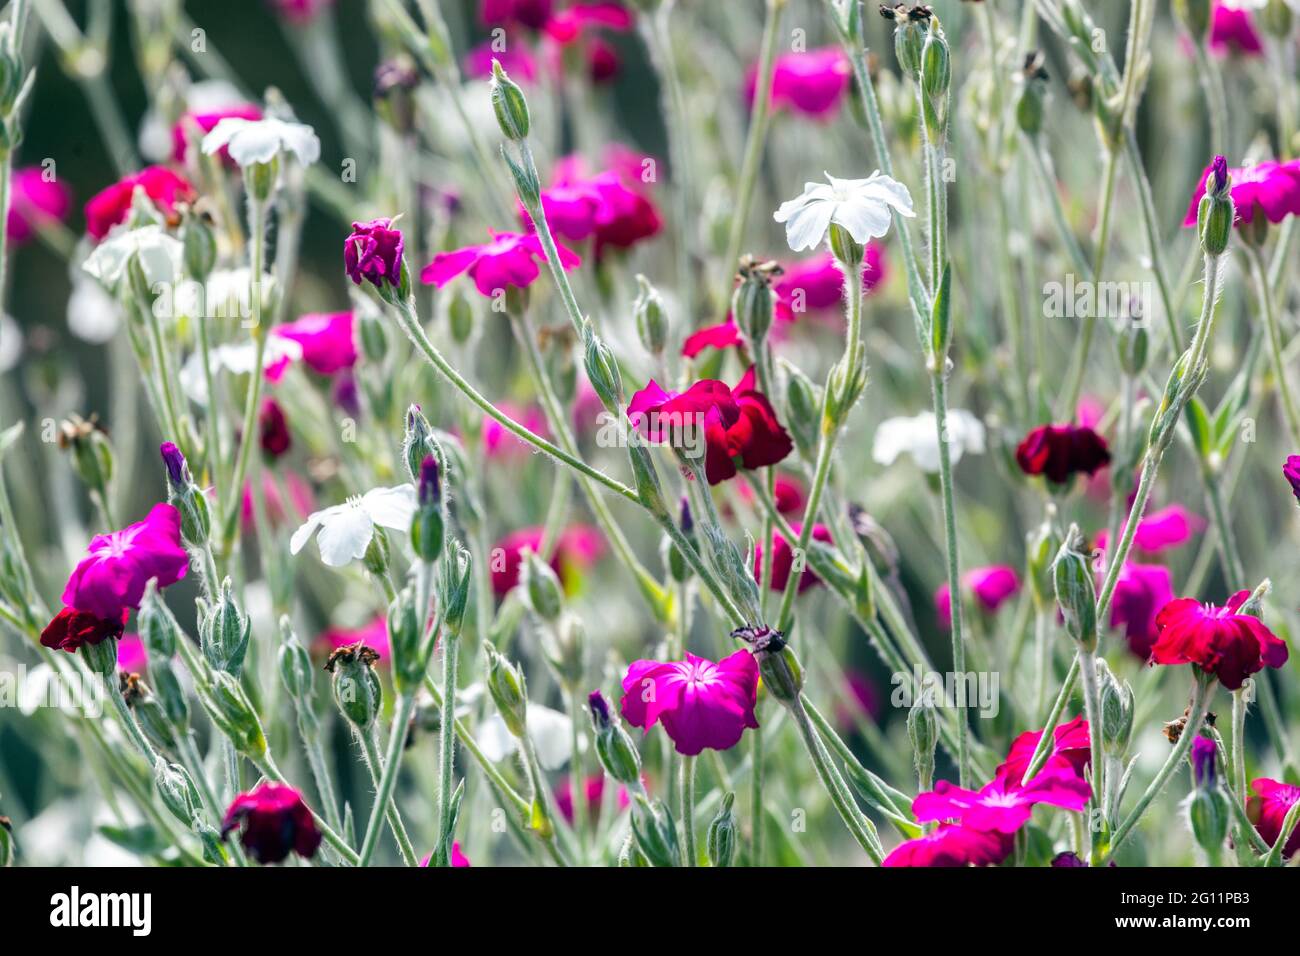 Purple White Rose campion Lychnis coronaria Dusty miller Flowers June Mixed Flower bed Stock Photo